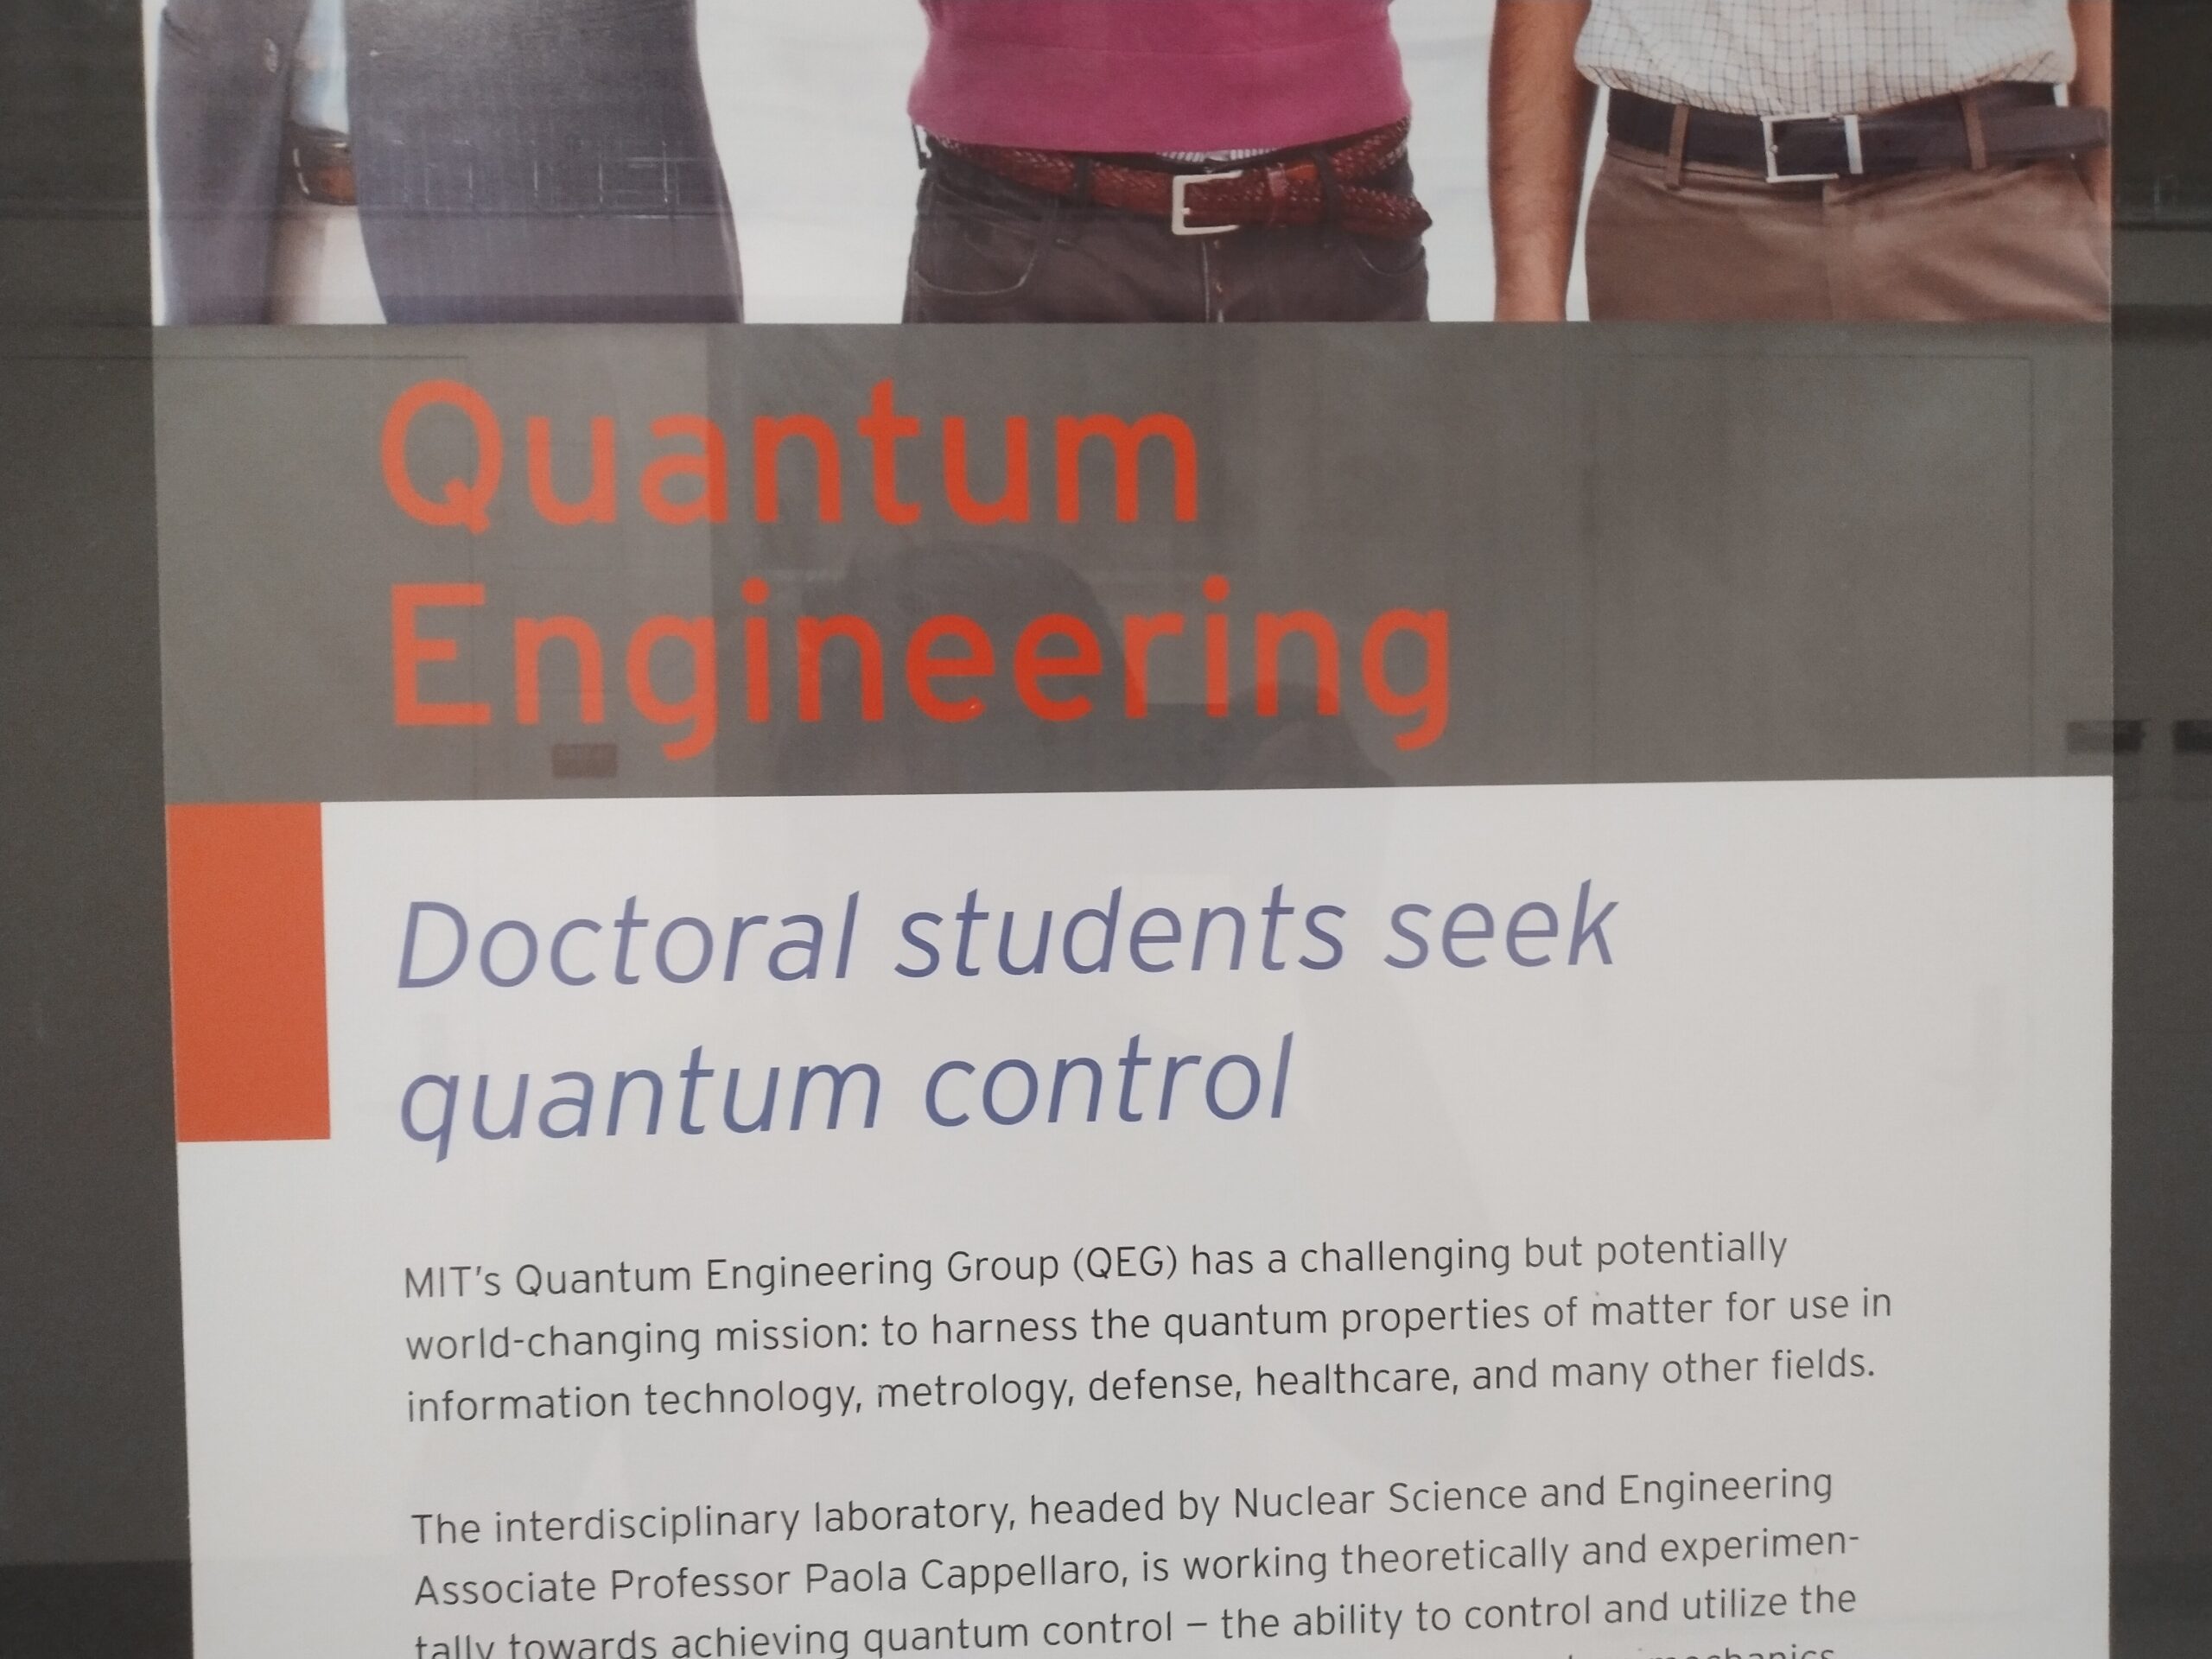 display about quantum engineering group